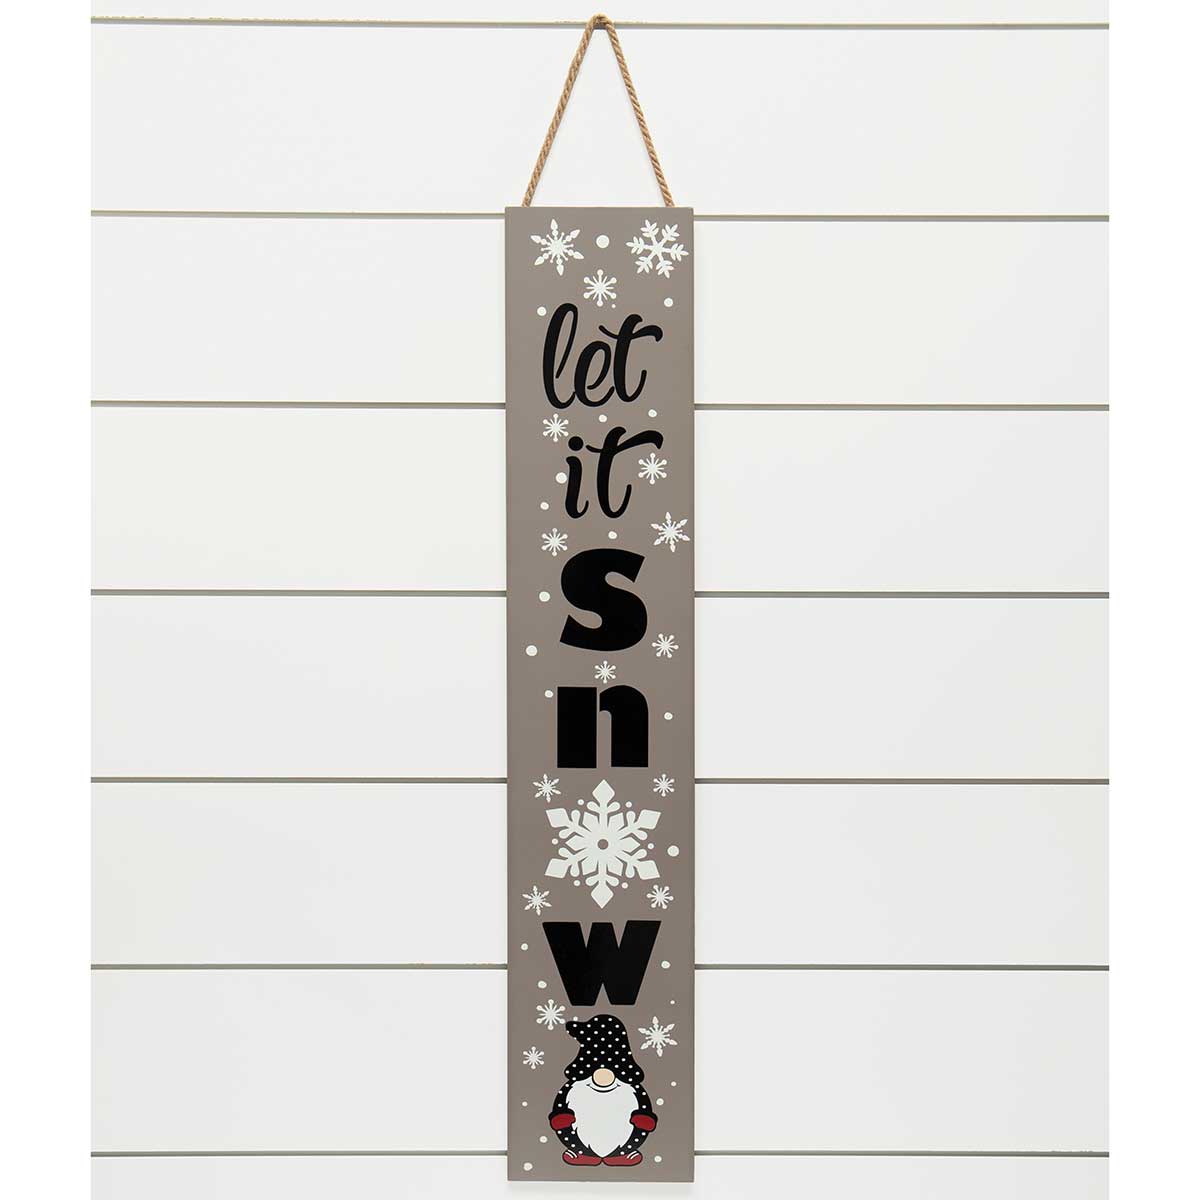 !LET IT SNOW RECTANGULAR WOOD SIGN GREY/BLACK WITH b50